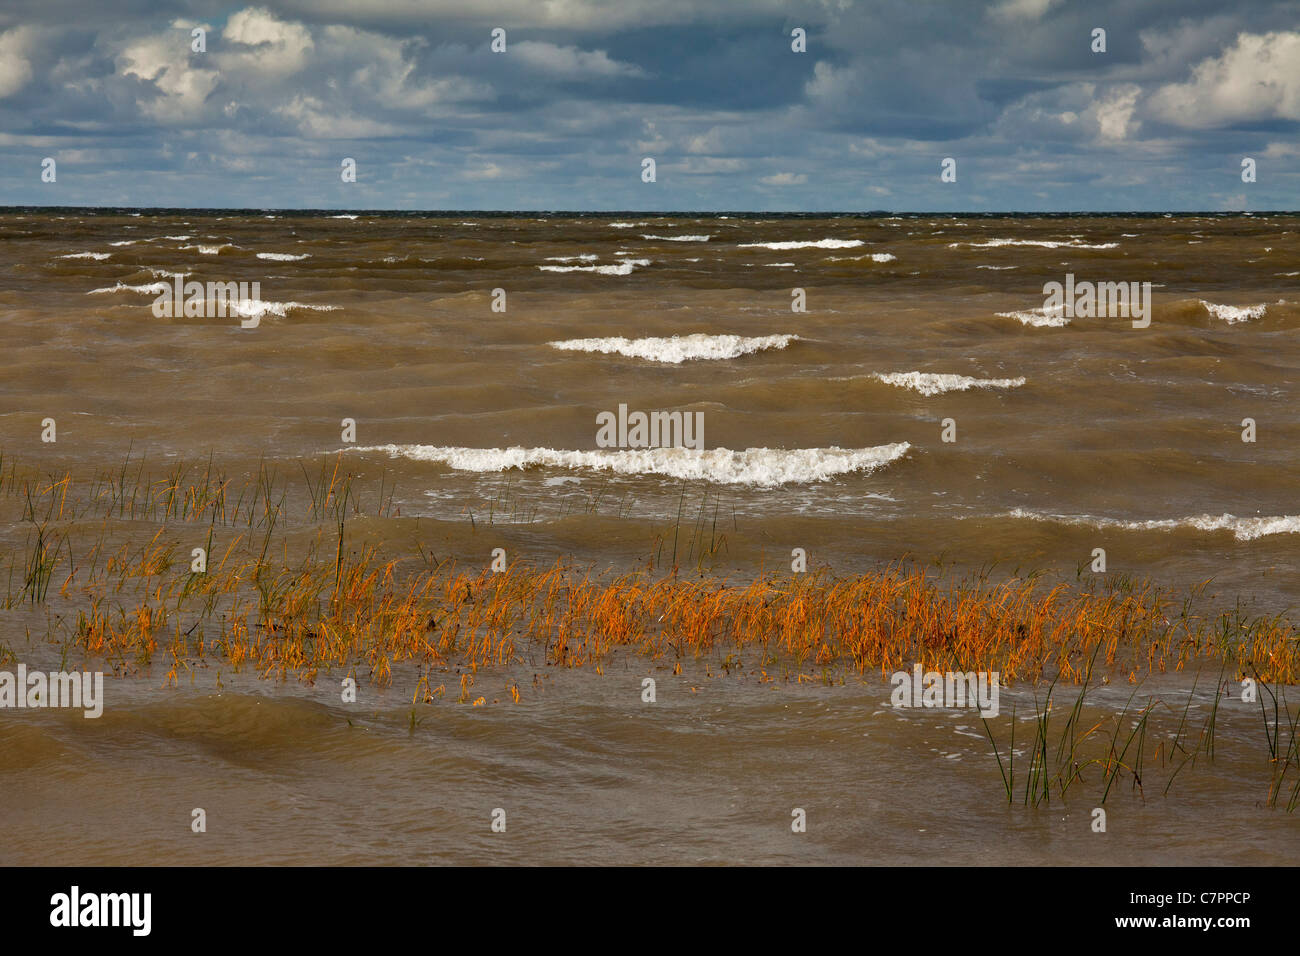 The Baltic Sea, Gulf of Finland, on a rough autumn day, with Sea Club-rush etc in the foreground. Kesse Island, Estonia. Stock Photo